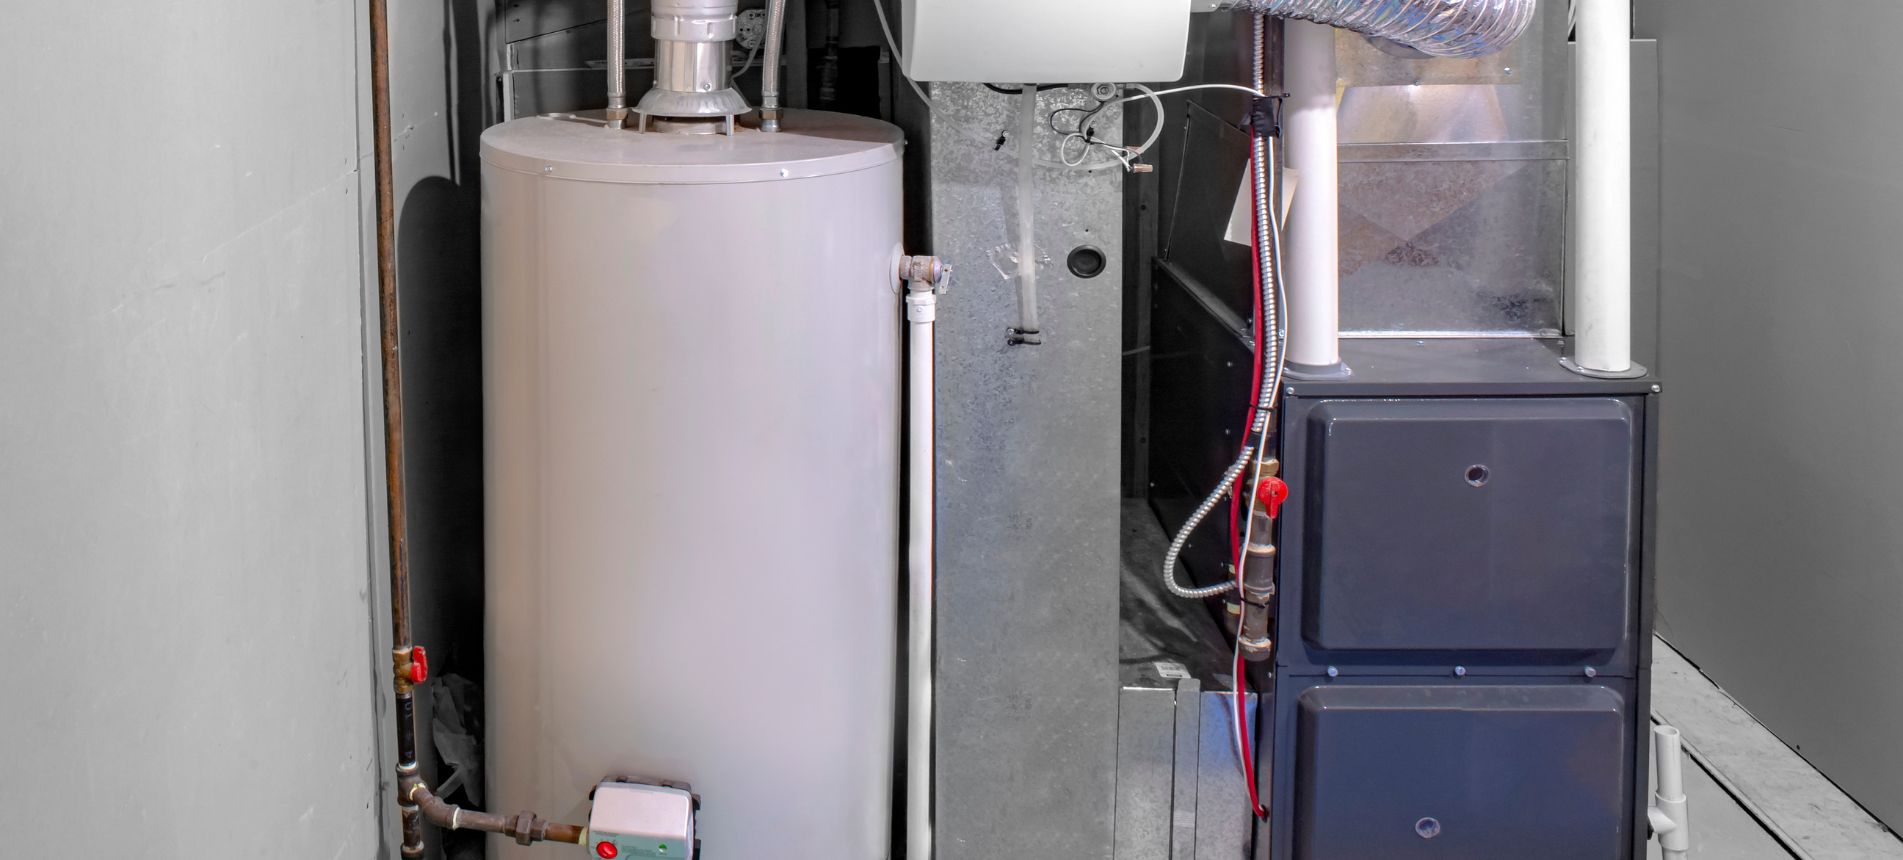 Attributes To Look For When Buying a New Water Heater